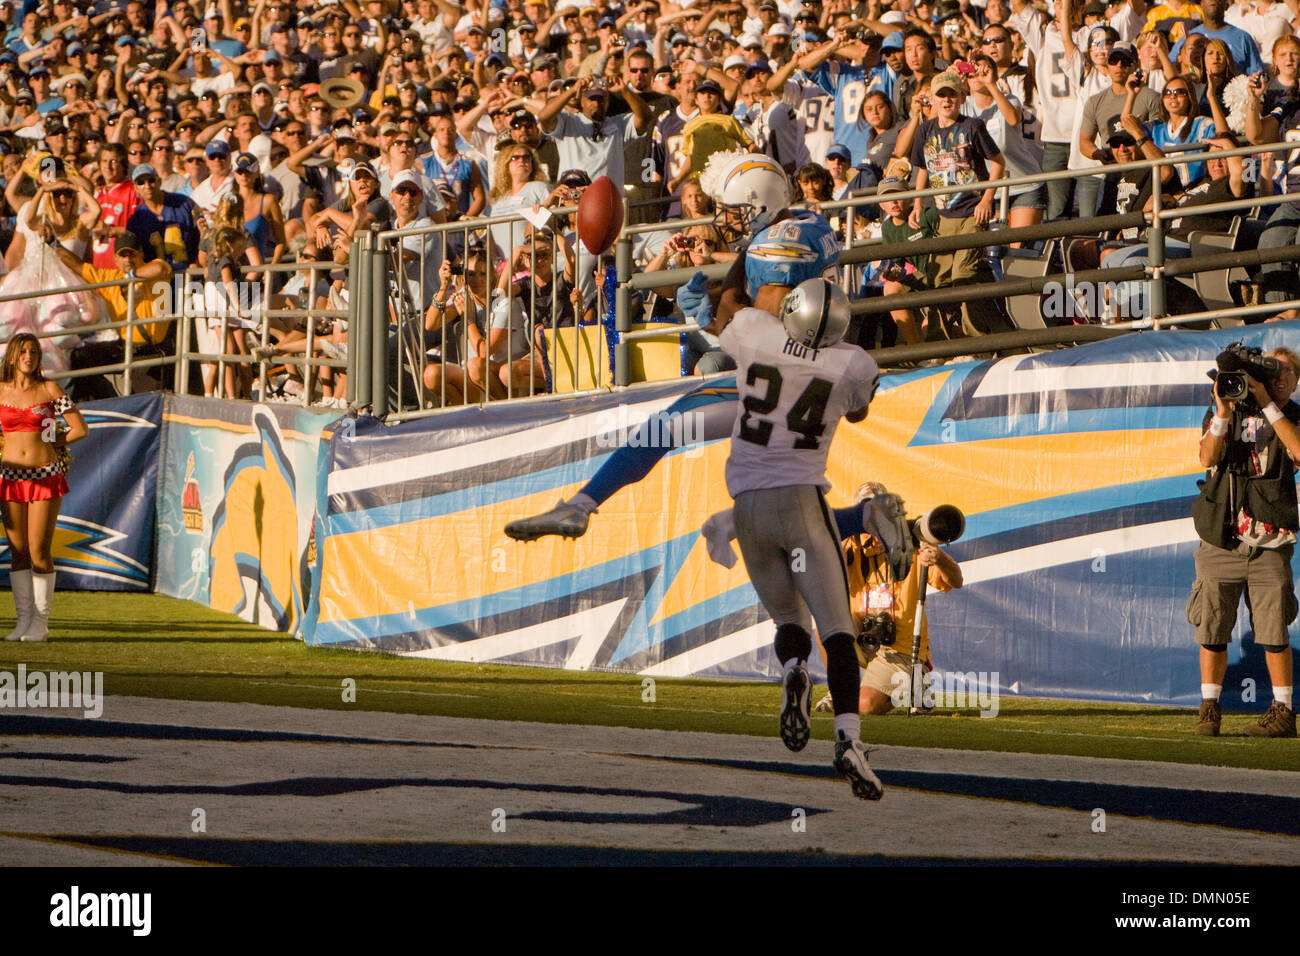 Nov 01, 2009 - San Diego, California, USA - The San Diego Chargers made it 13 wins in a row with a 24-16 victory over the Oakland Raiders.  Receiver VINCENT JACKSON drops a pass in the end zone while Raider safety MICHAEL HUFF defends. (Credit Image: © Daniel Knighton/ZUMA Press) Stock Photo